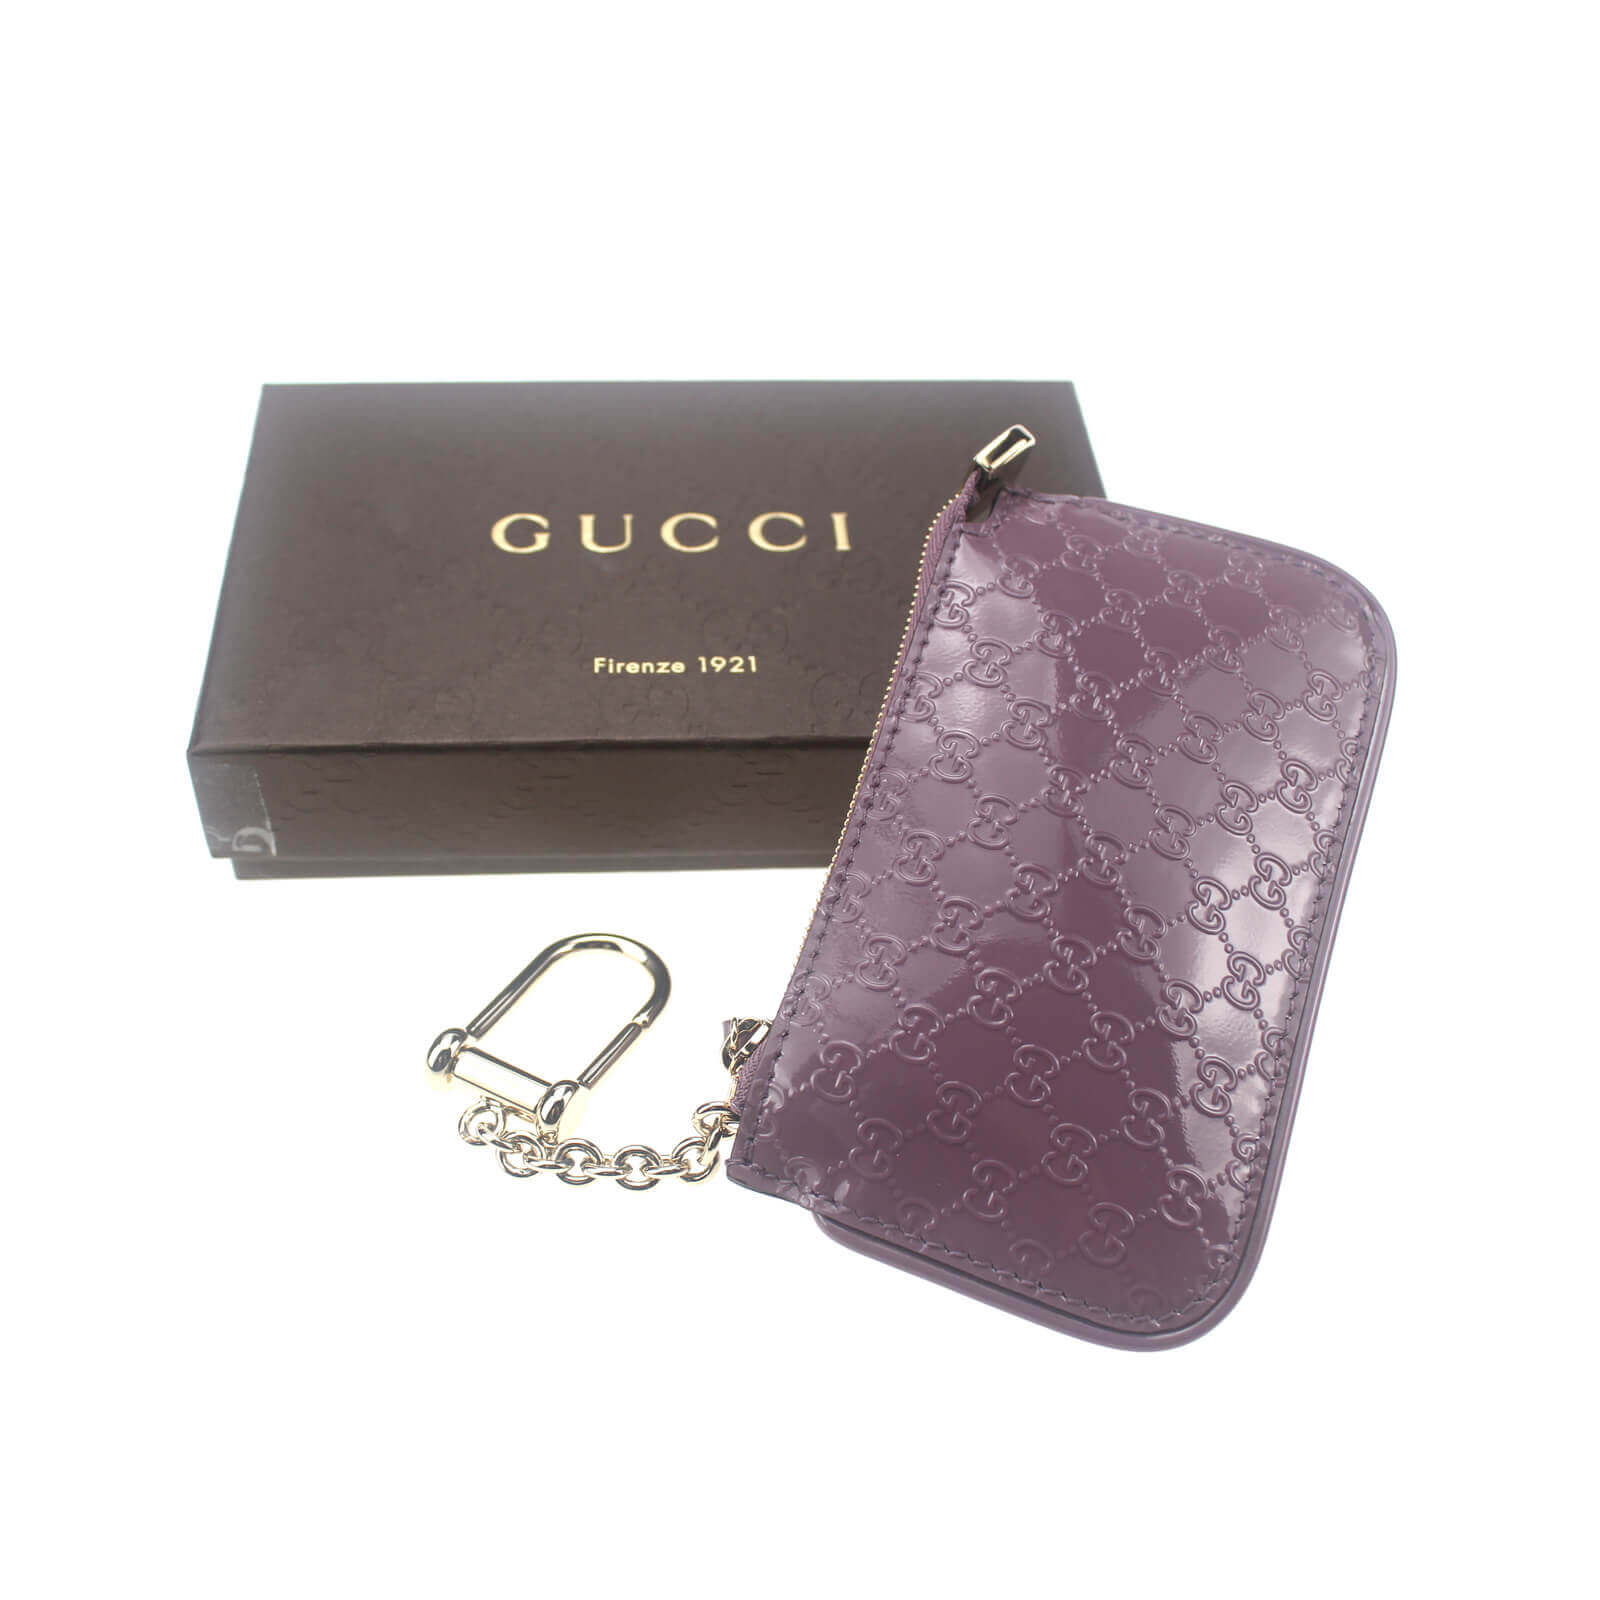 Gucci Brown Guccissima Leather Key Holder Case Pouch Wallet